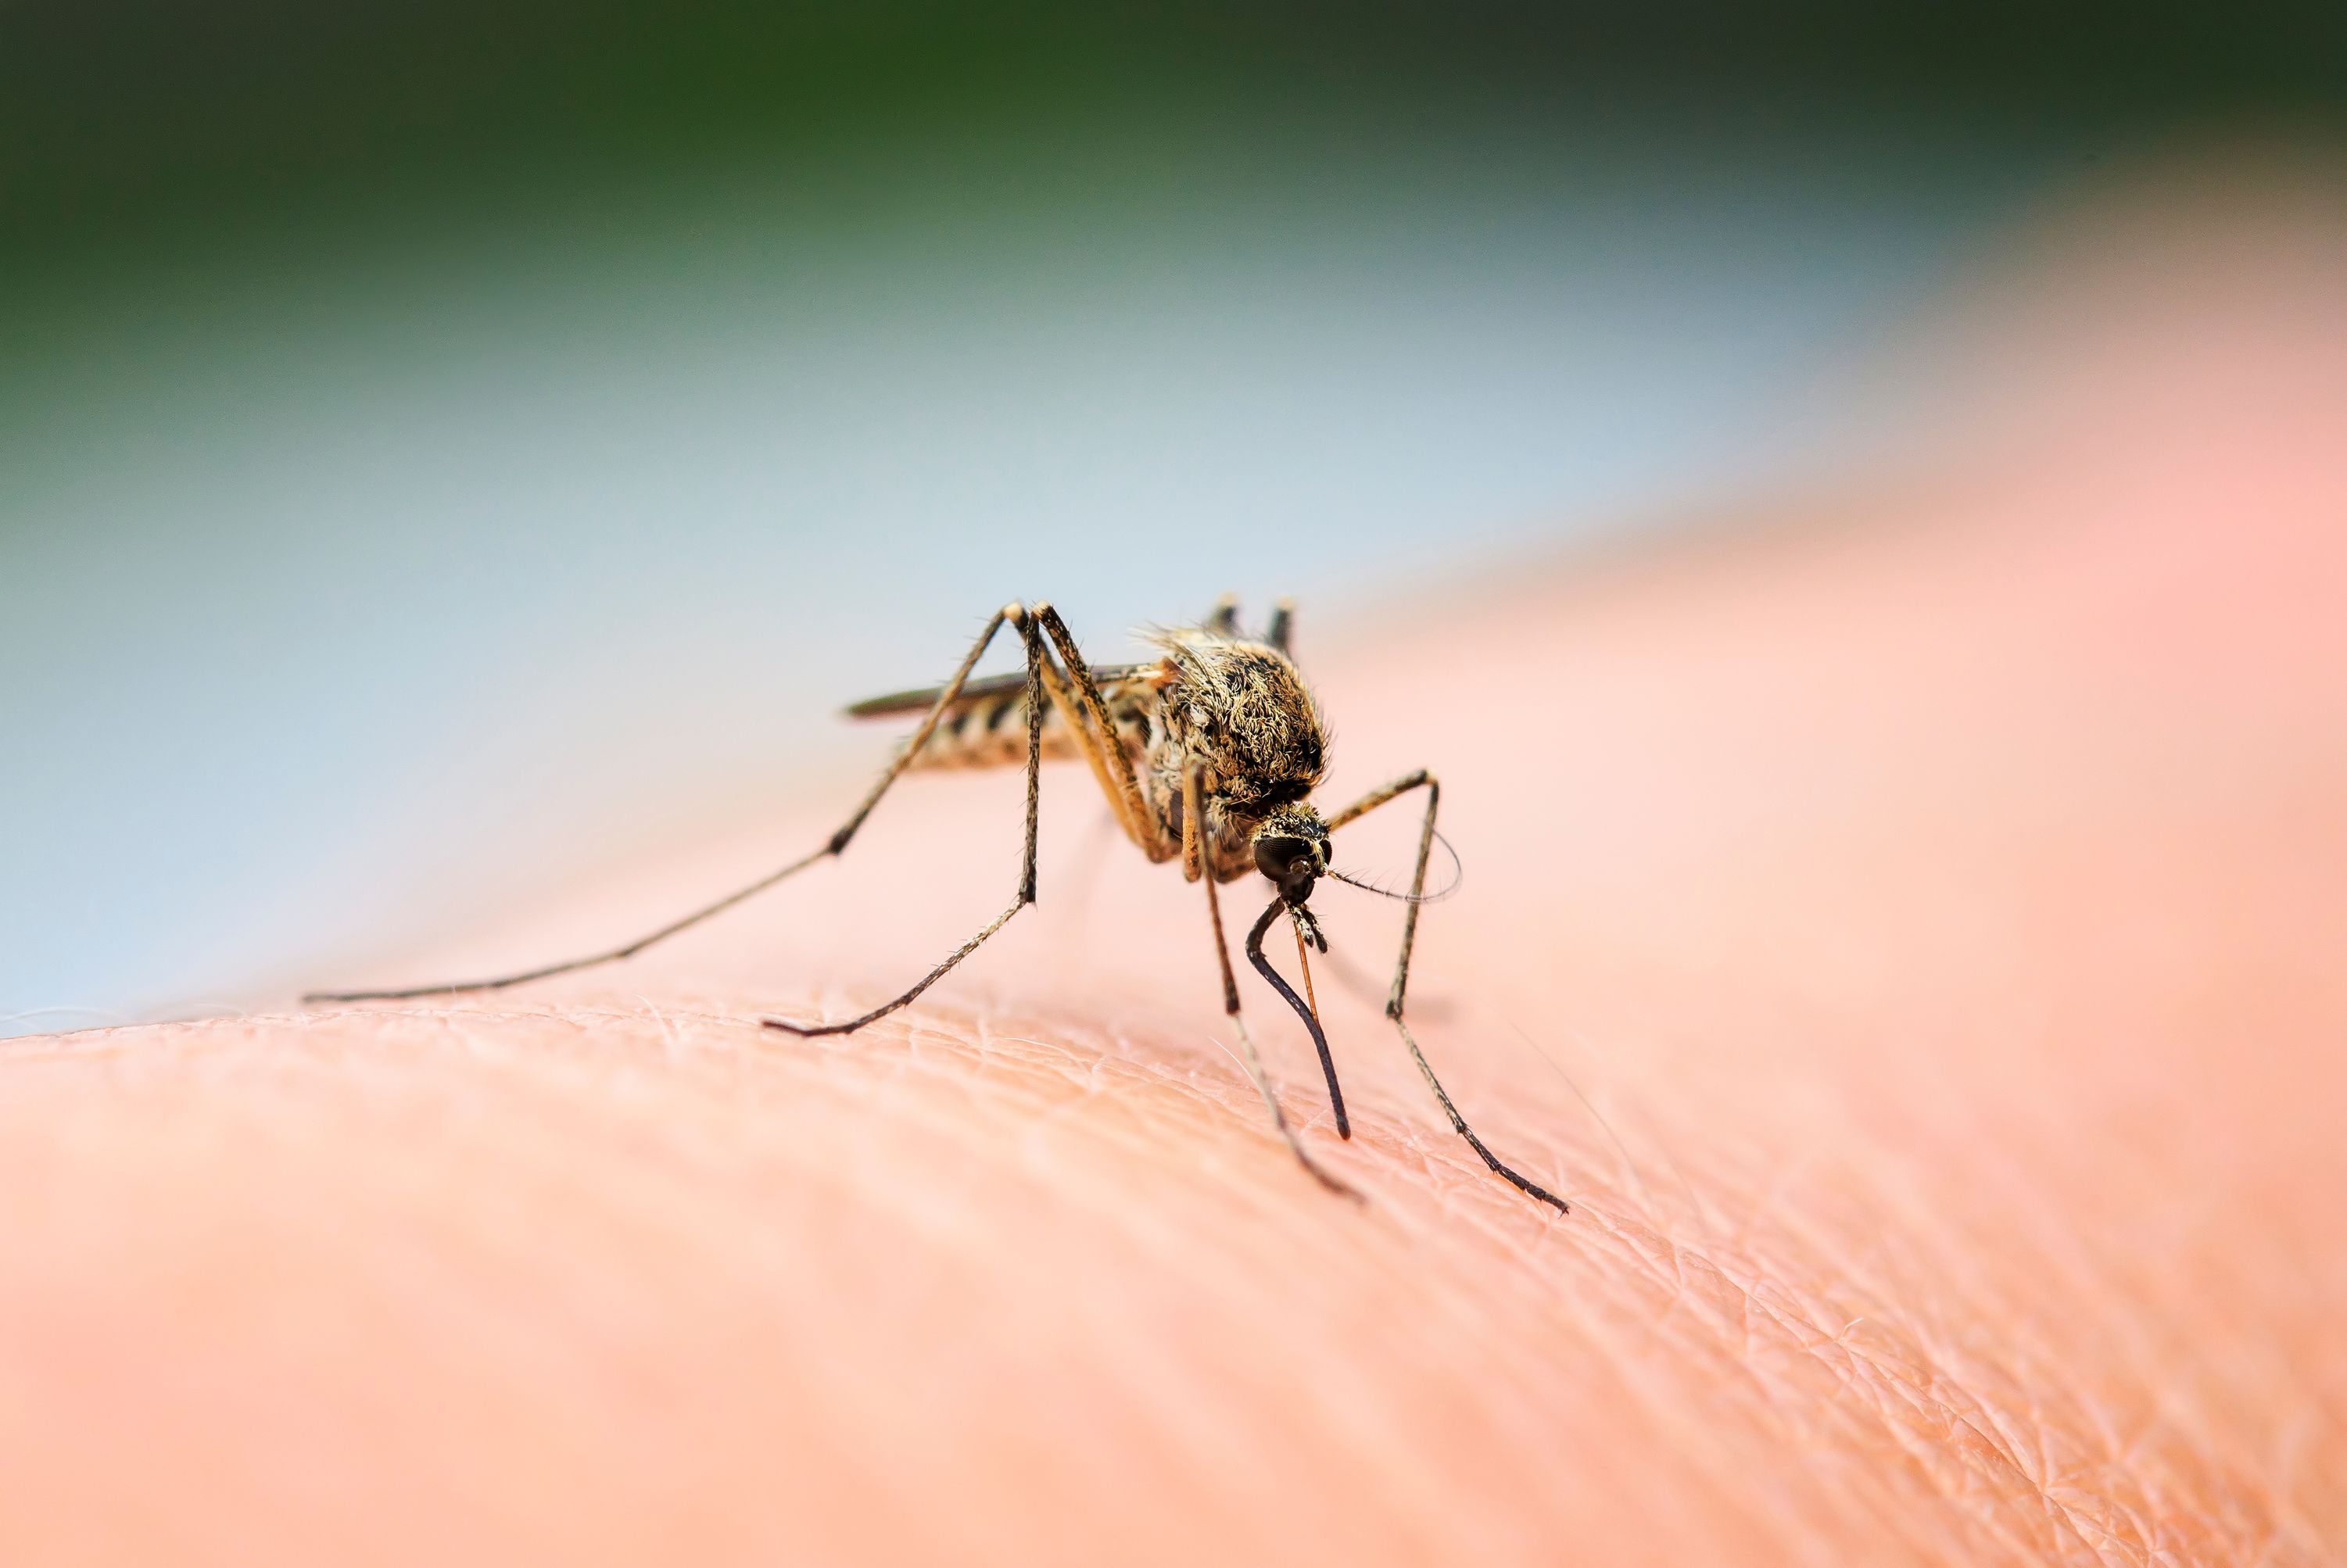 mosquito sitting on her hand drinking blood